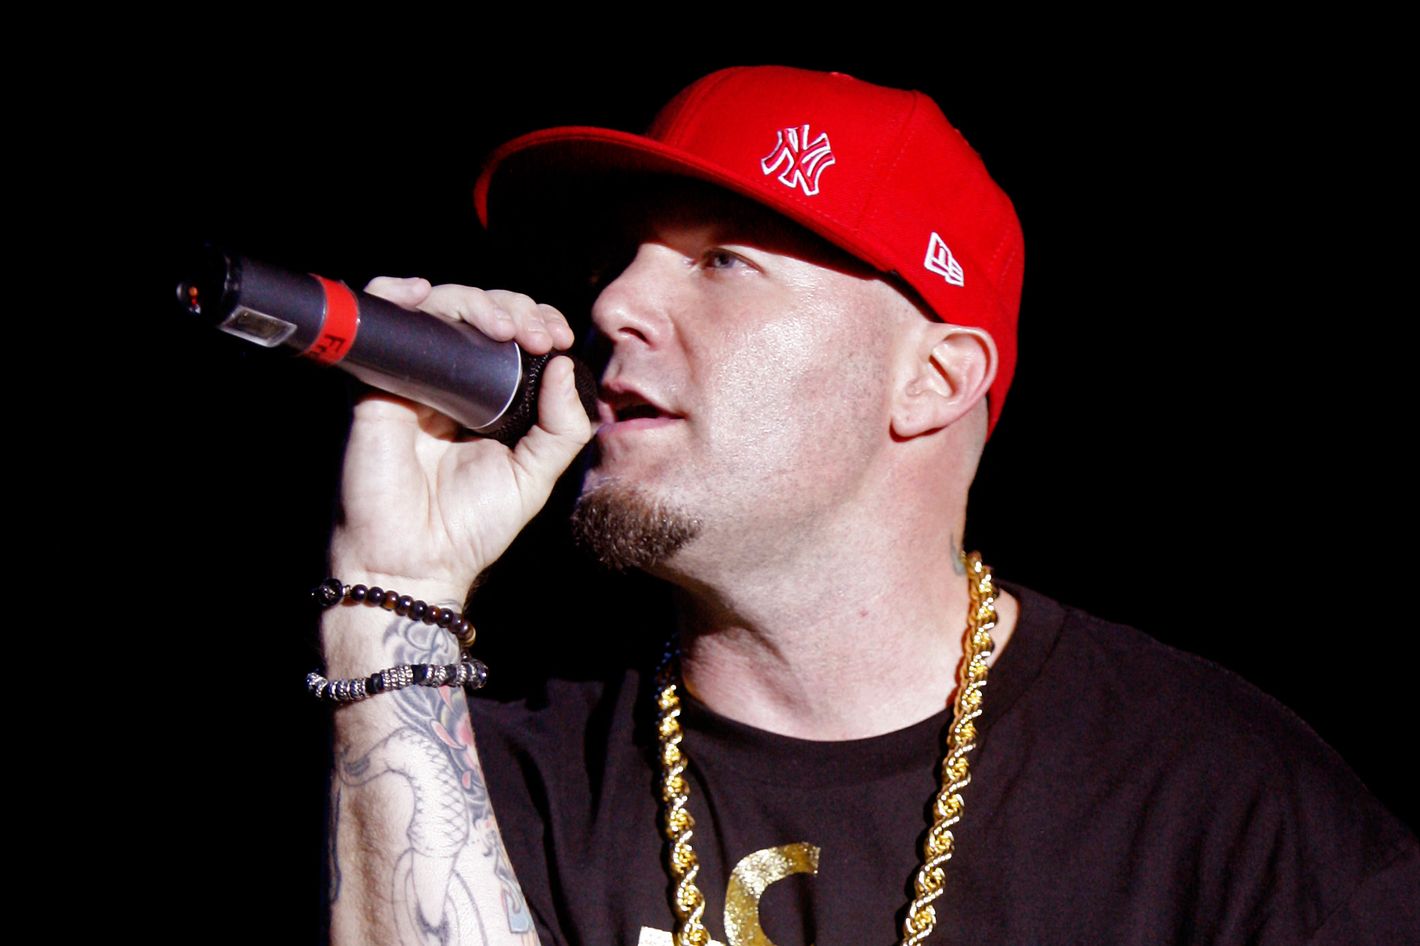 IT HURT WHEN THE YANKEES SUED ME.” THE FRED DURST INTERVIEW PT. 2 – 100%  NEWS